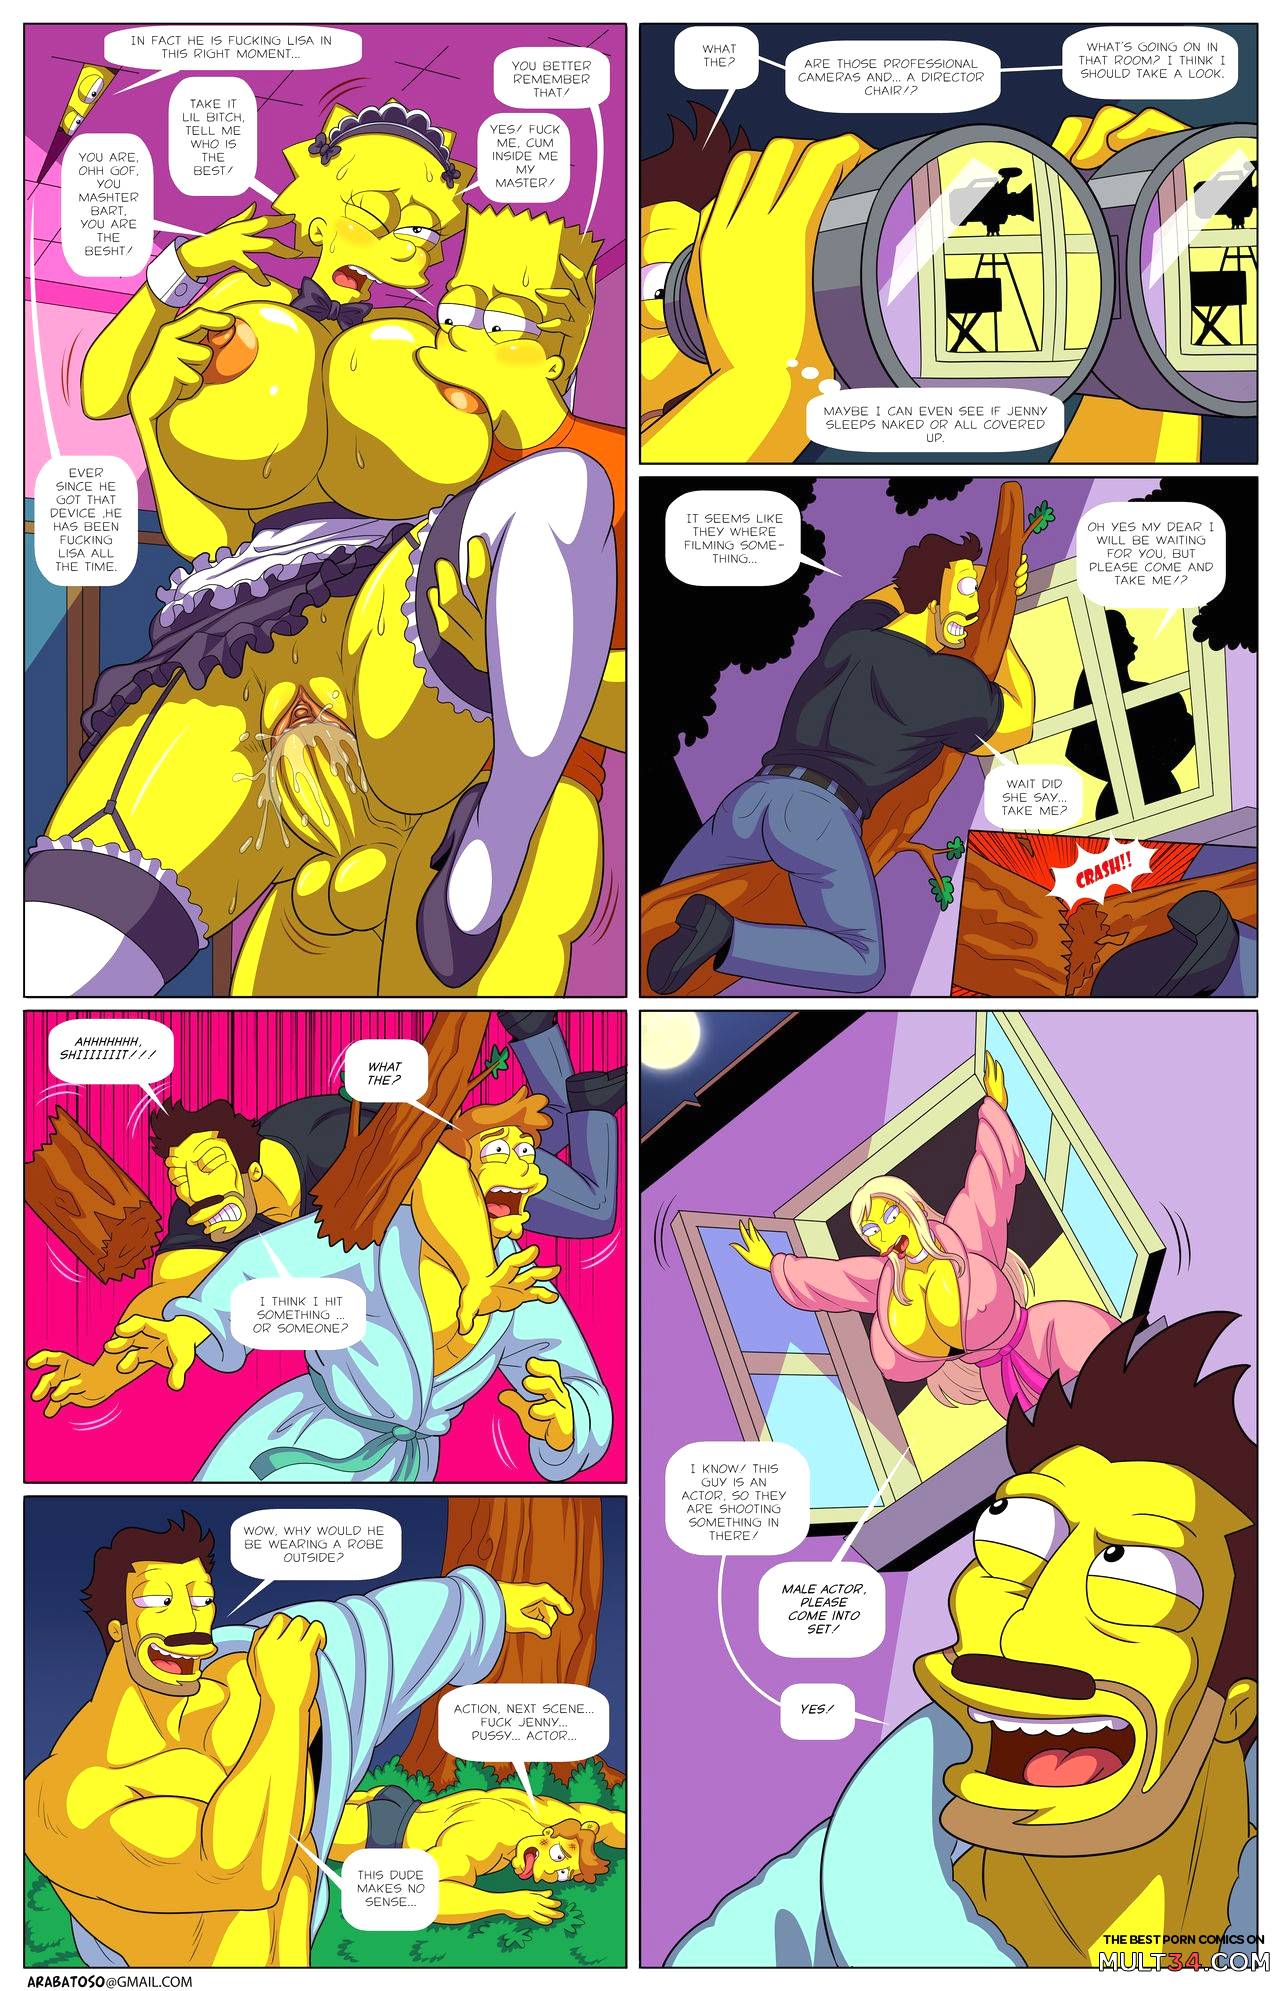 Darren's Adventure or Welcome To Springfield page 42